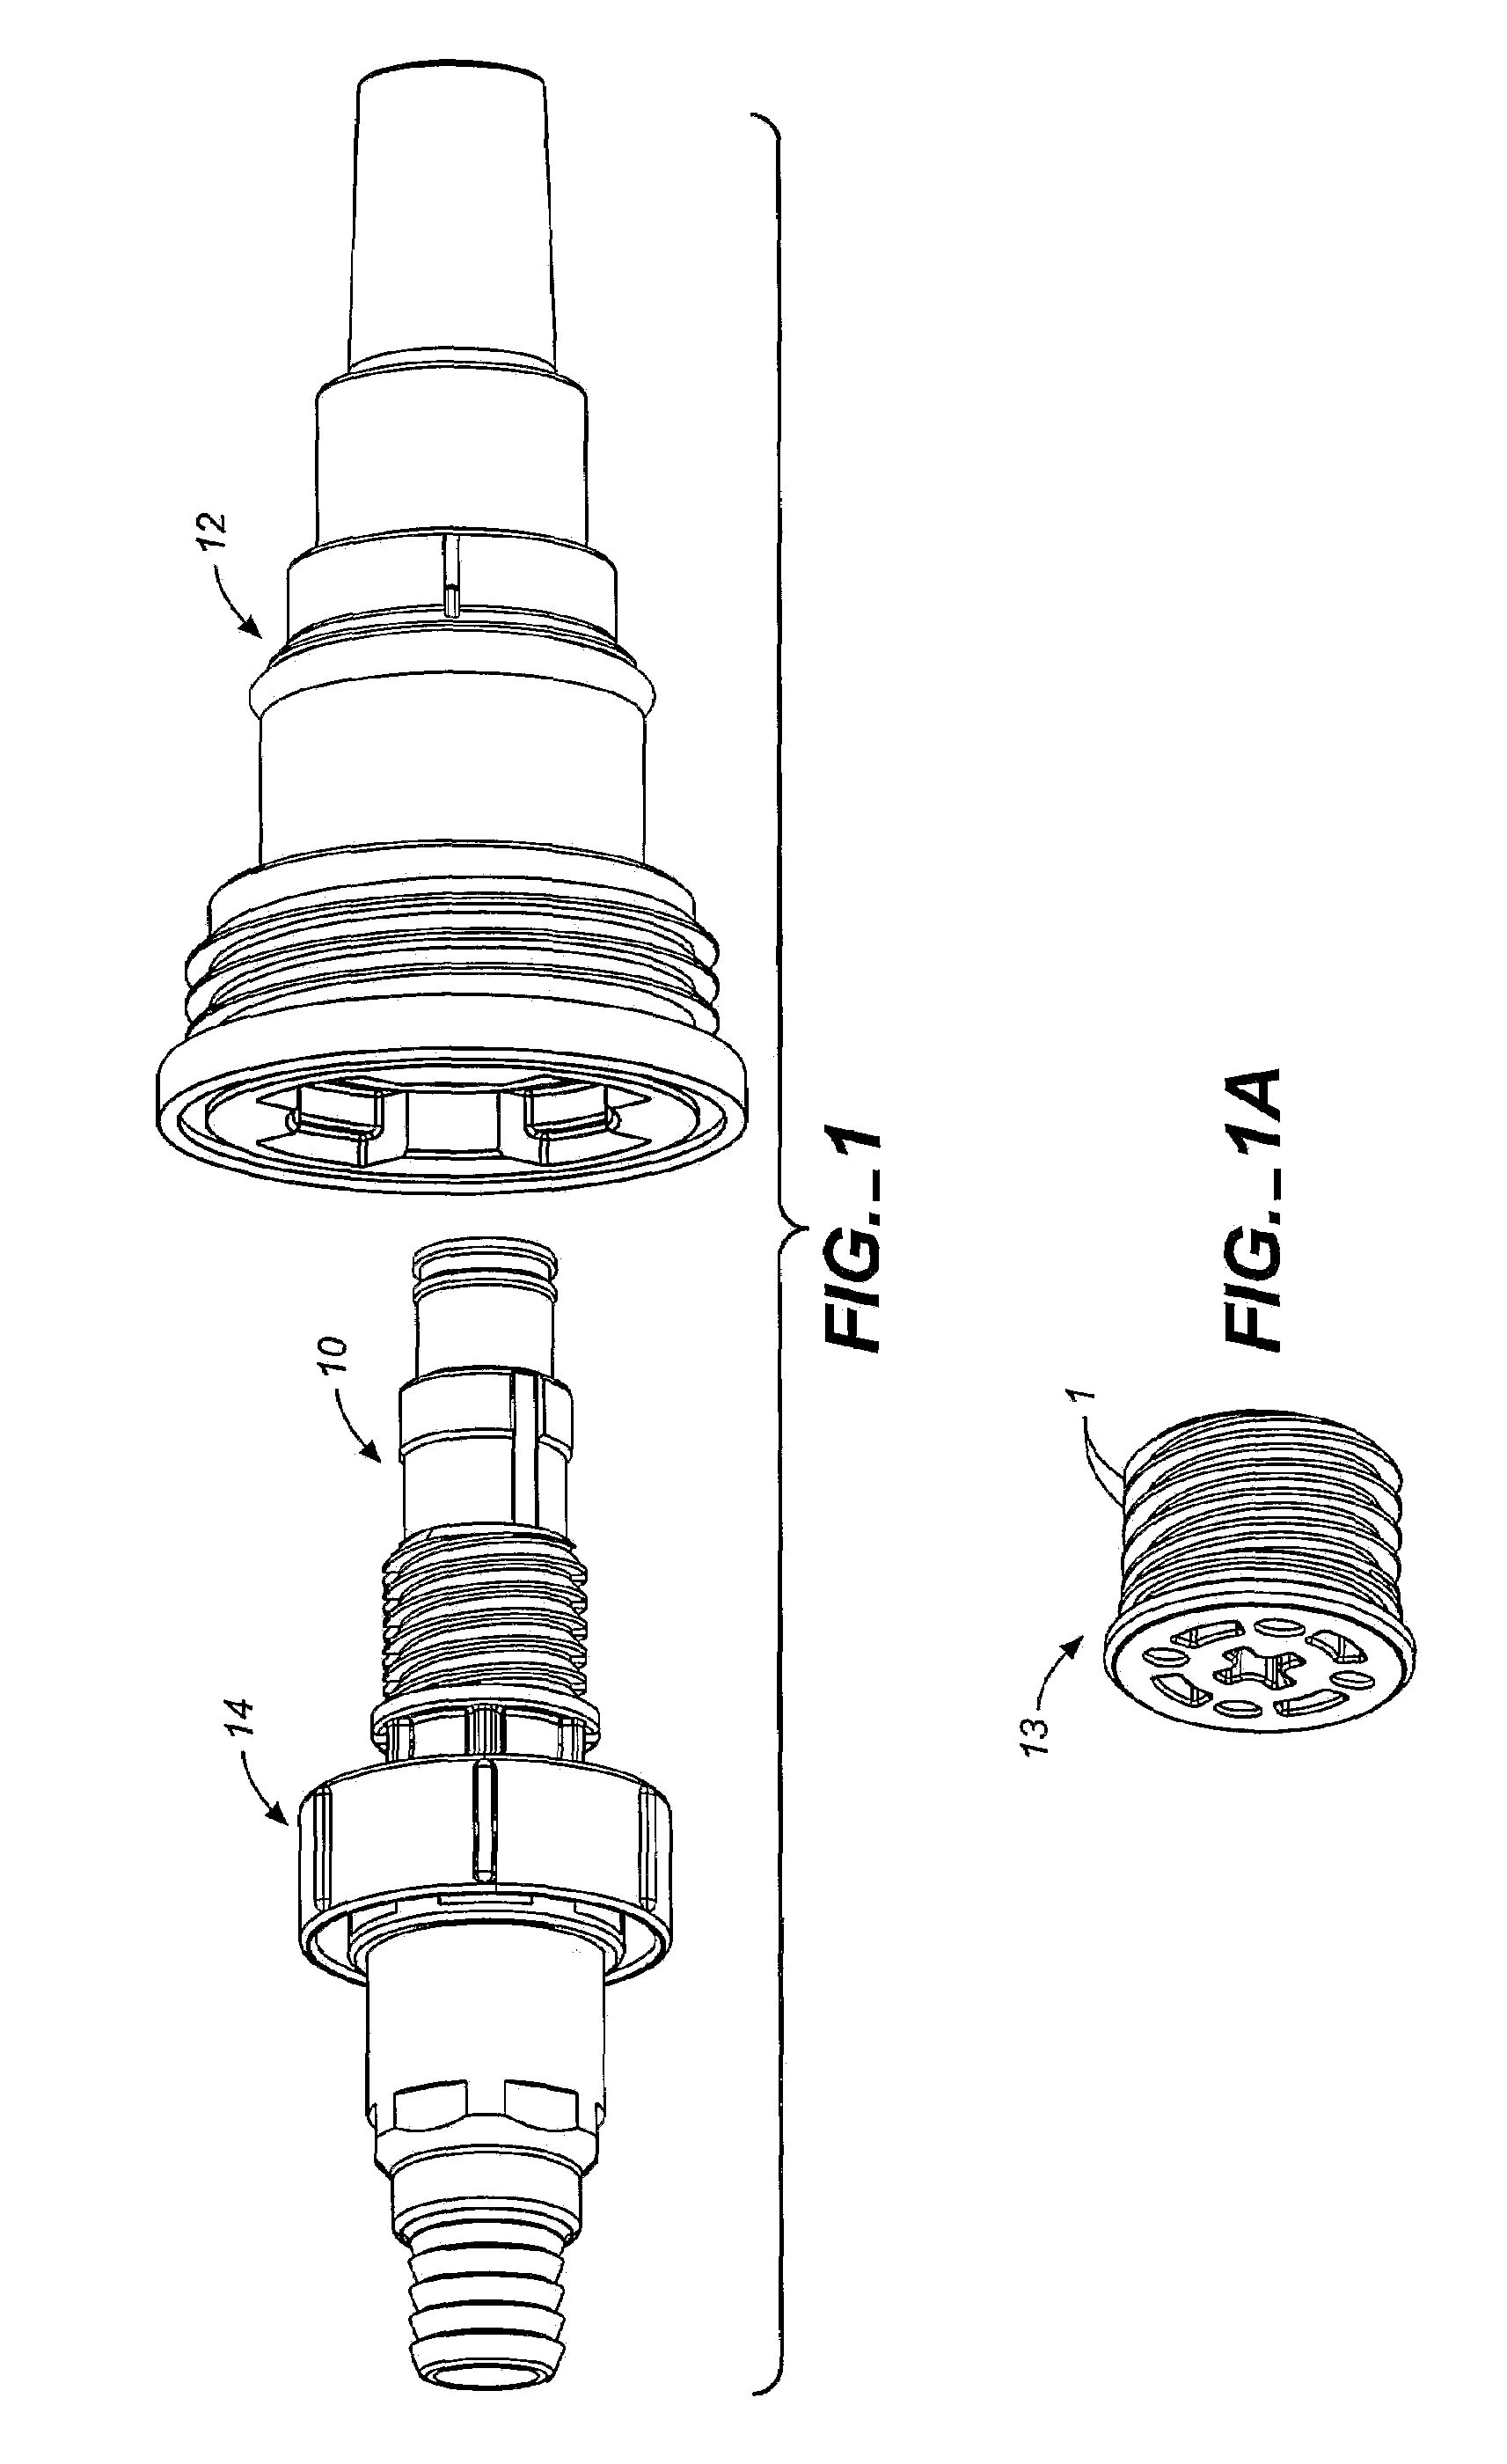 Connect/disconnect coupling for a container